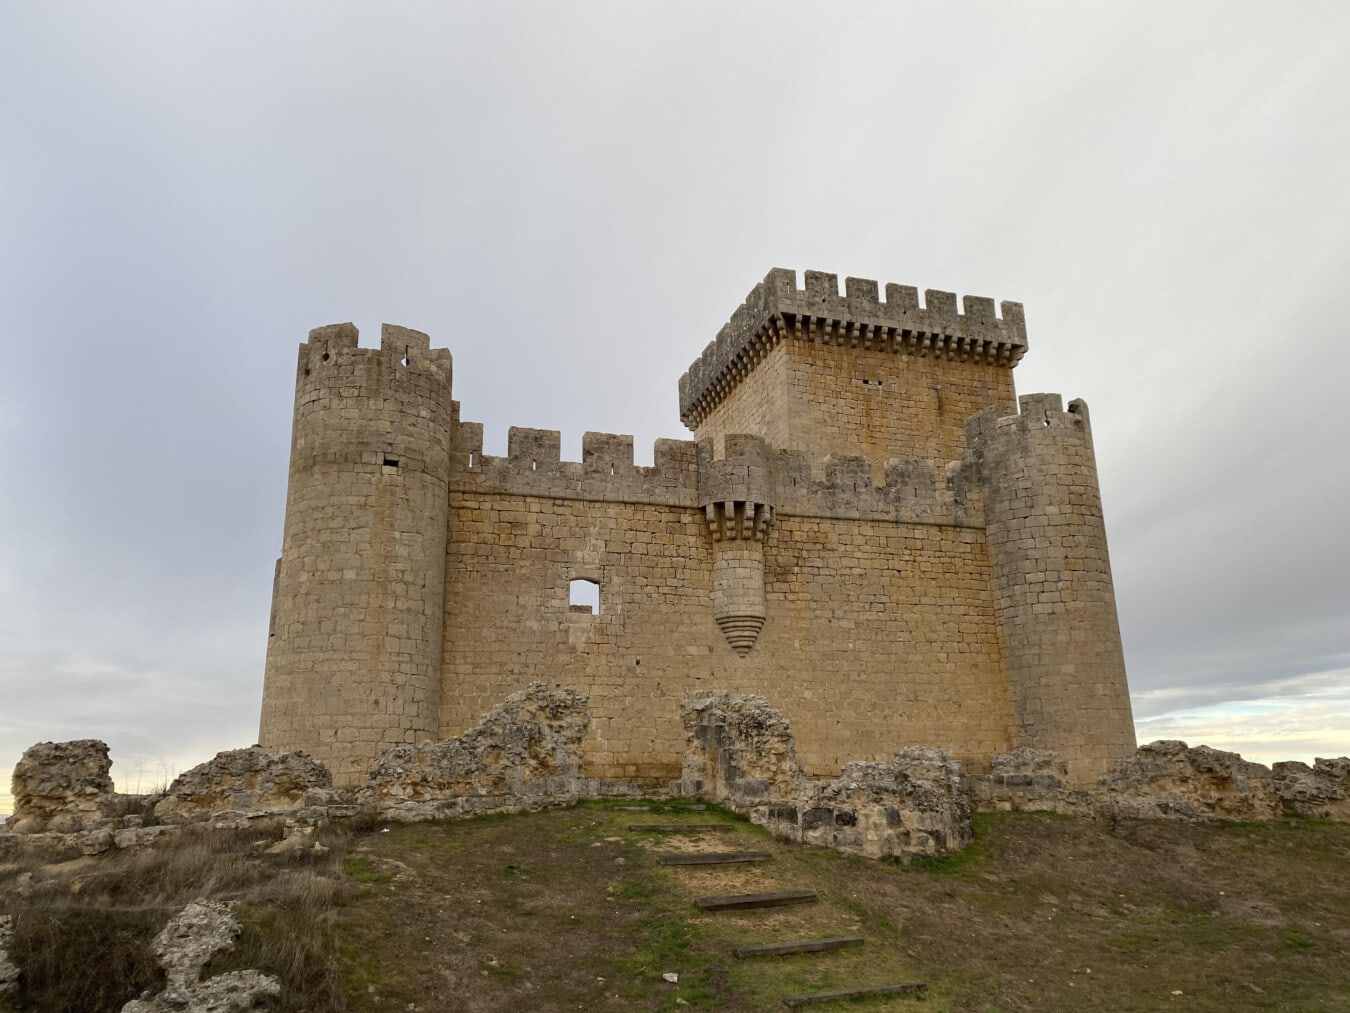 Castle of Villalonso, Zamora, Spain, medieval, fortress, castle, fortification, walls, tower, rampart